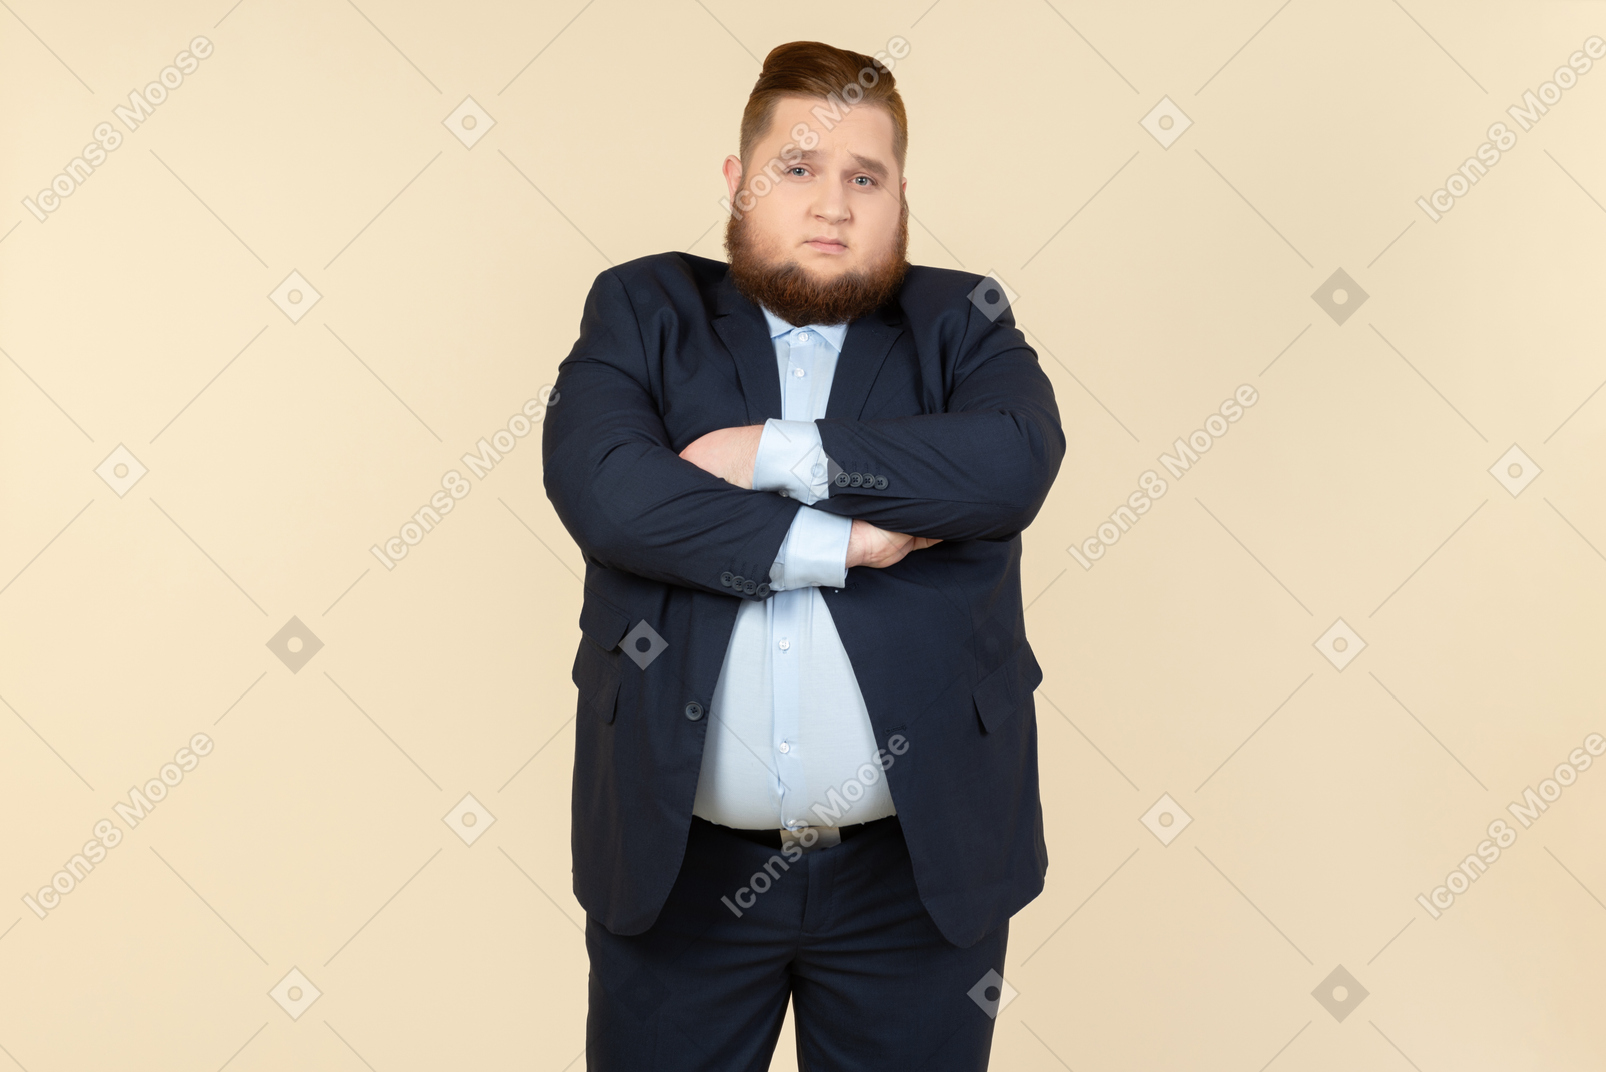 Offended looking young overweight office employee standing with his hands crossed